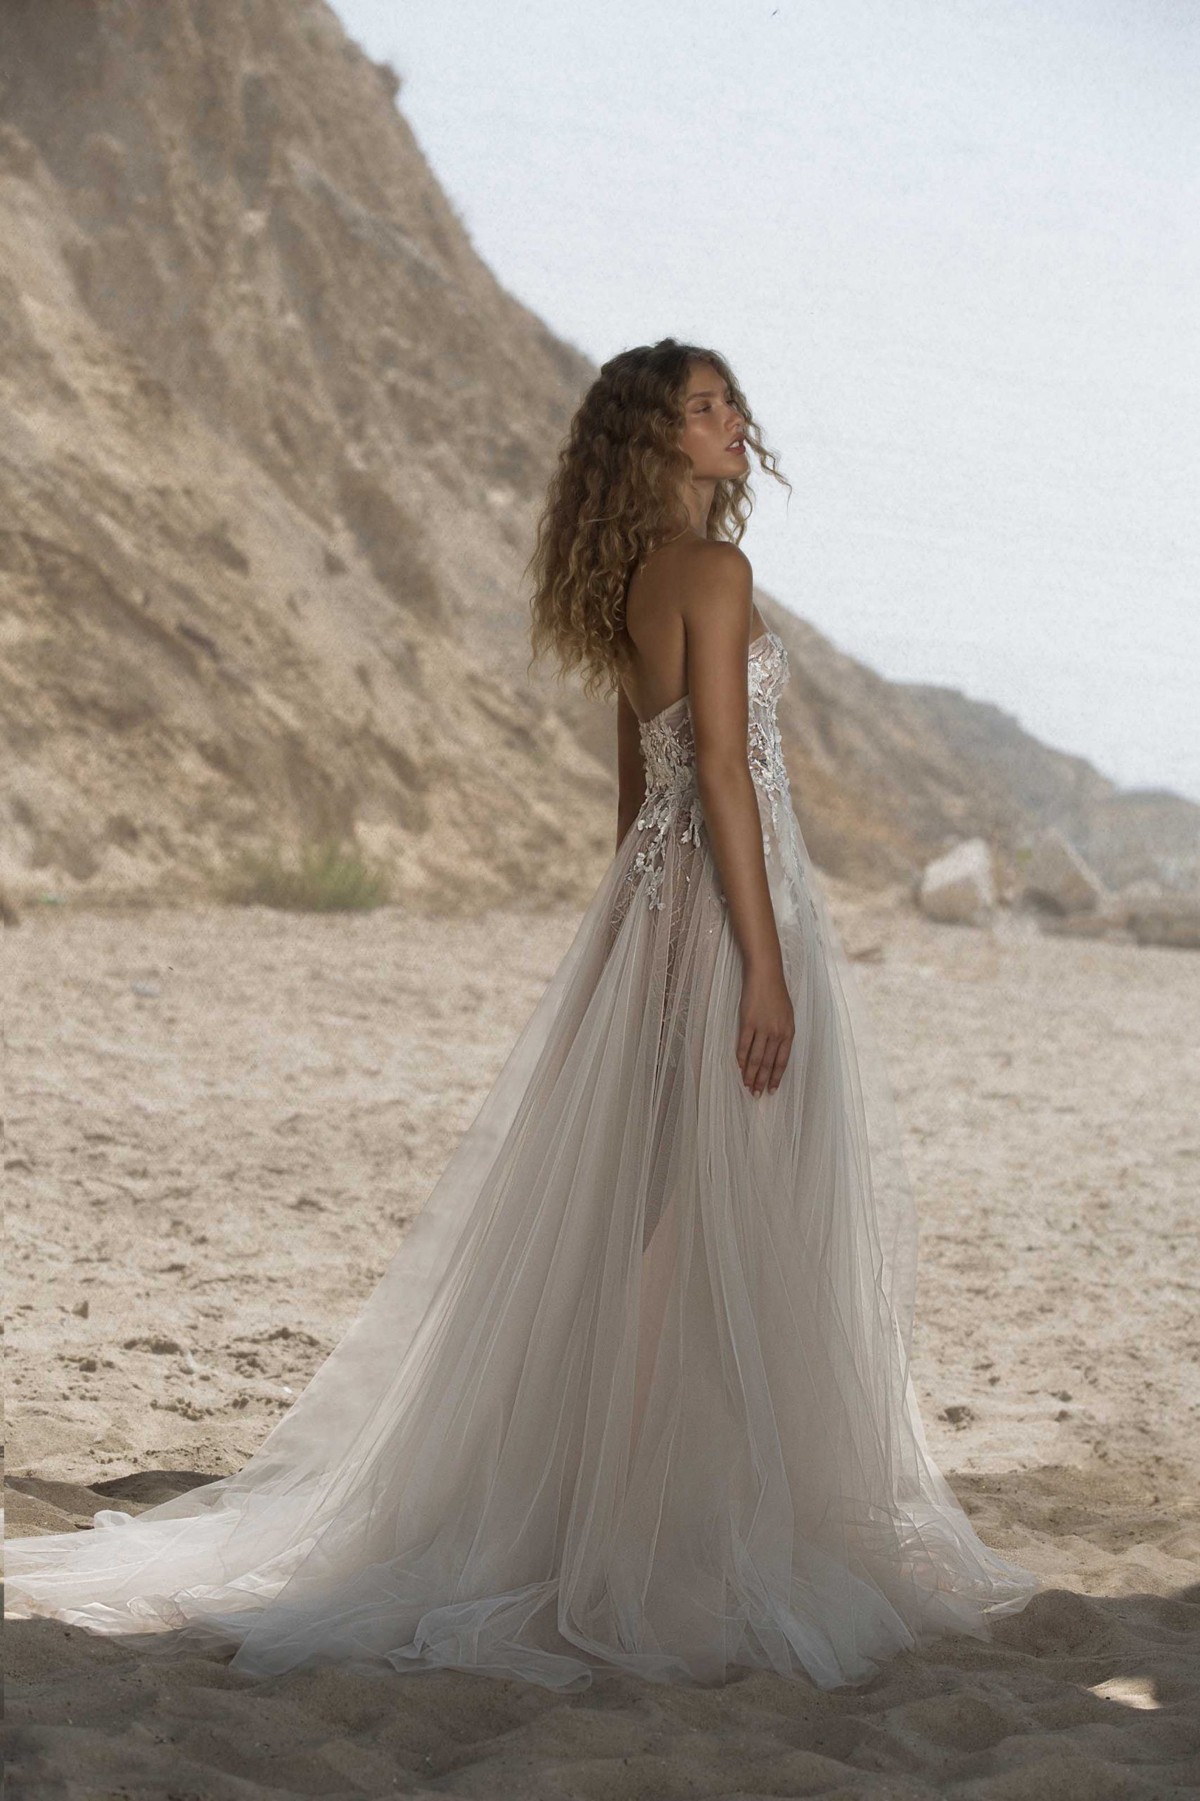 21-HILA Bridal Dress Inspirated By Berta Muse 2021 Vista Mare Collection